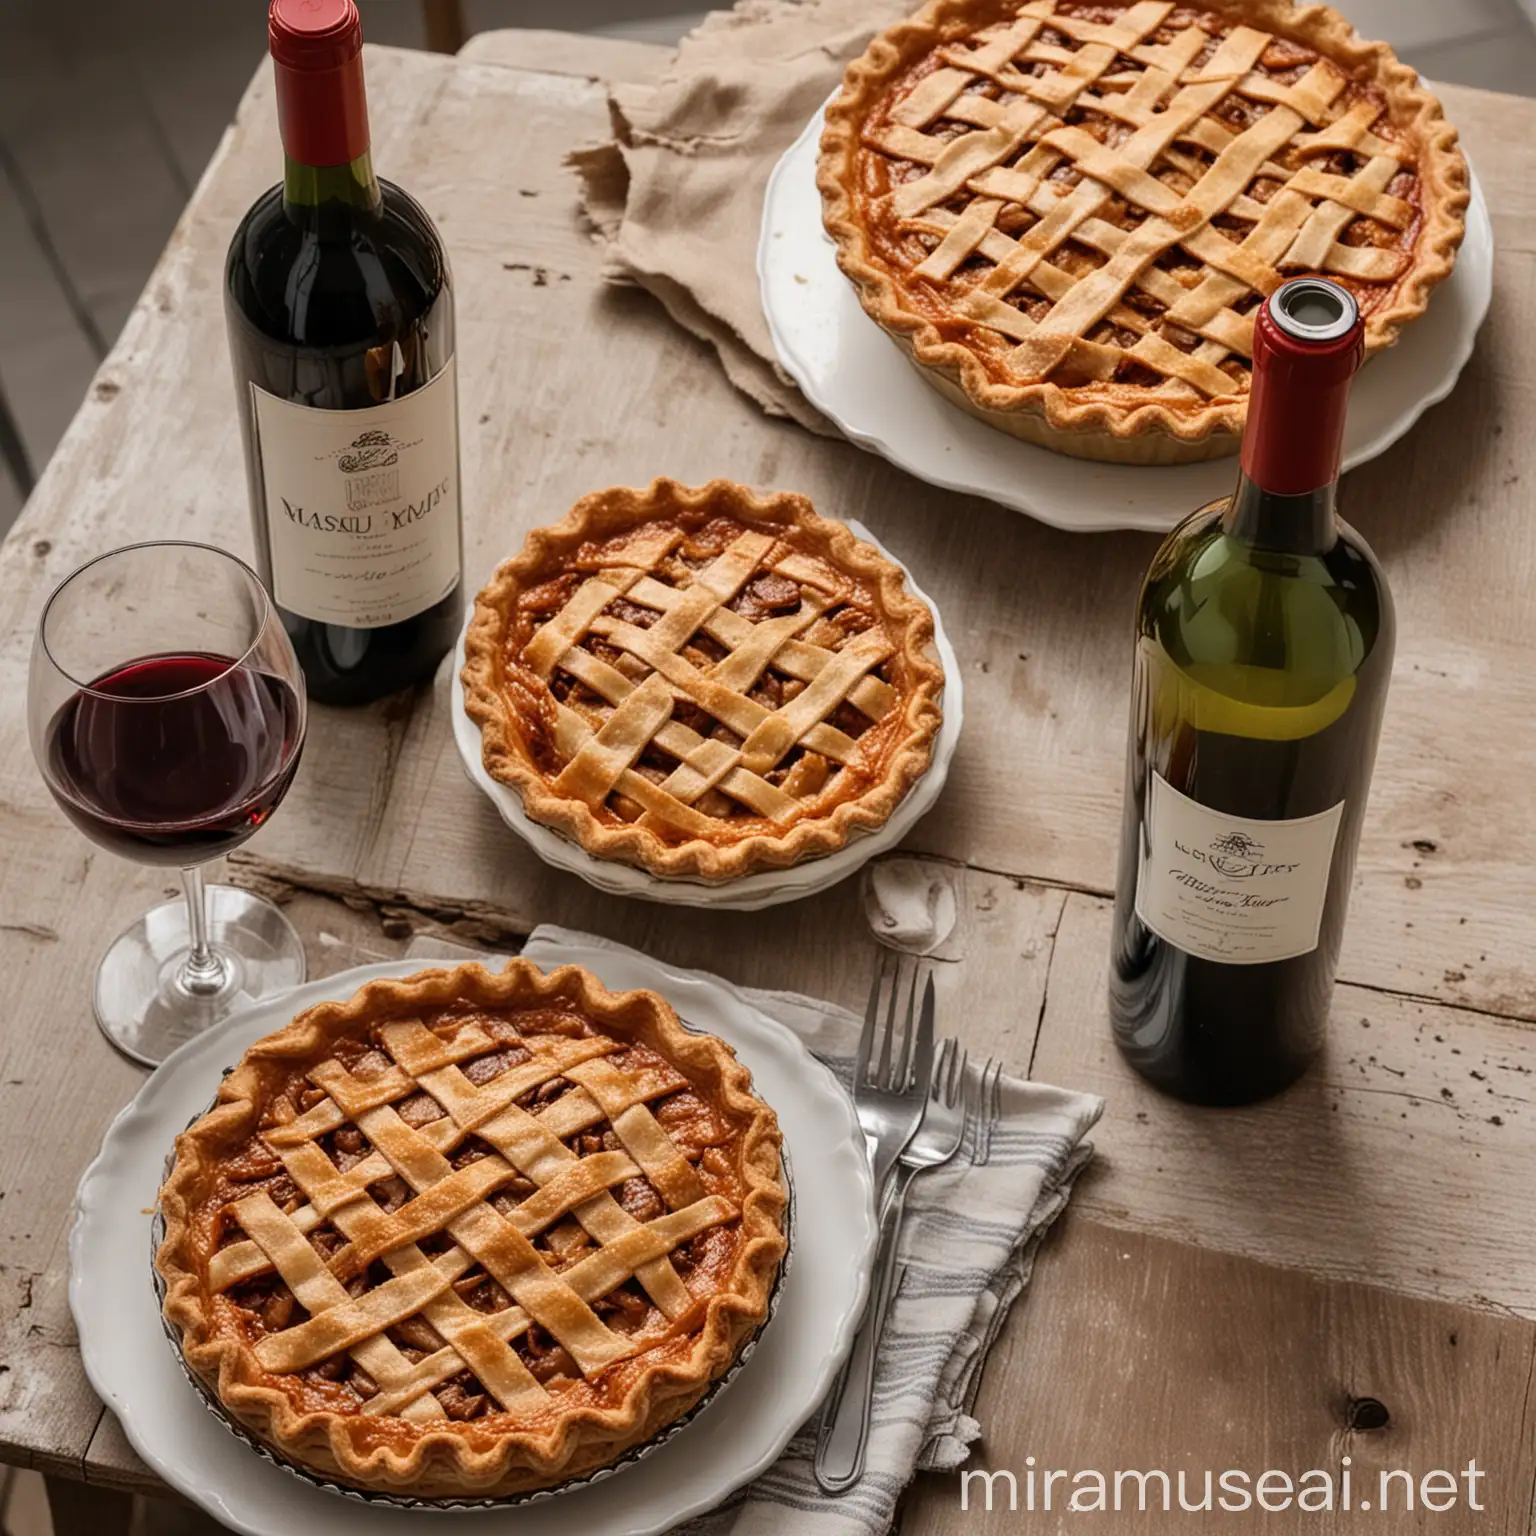 a pie on a table also a bottle and a glass of wine